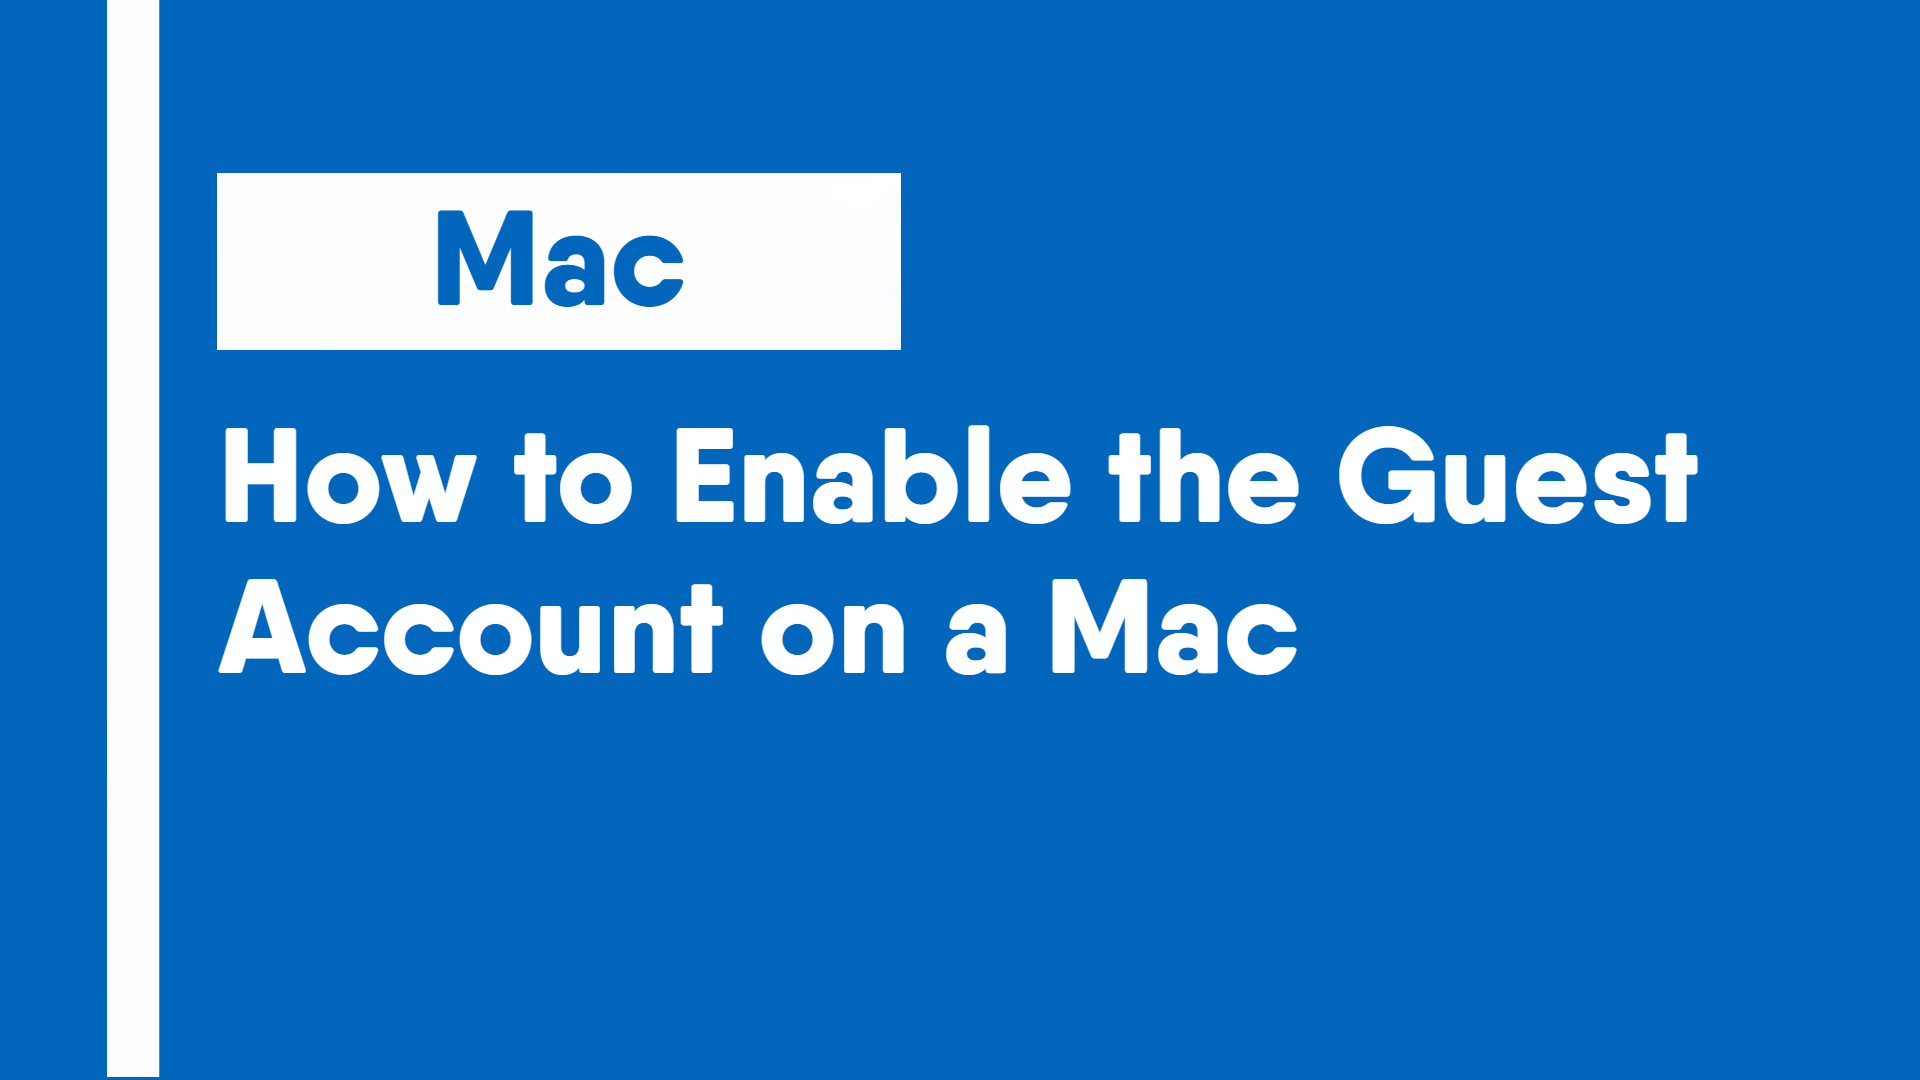 How to Enable the Guest Account on a Mac